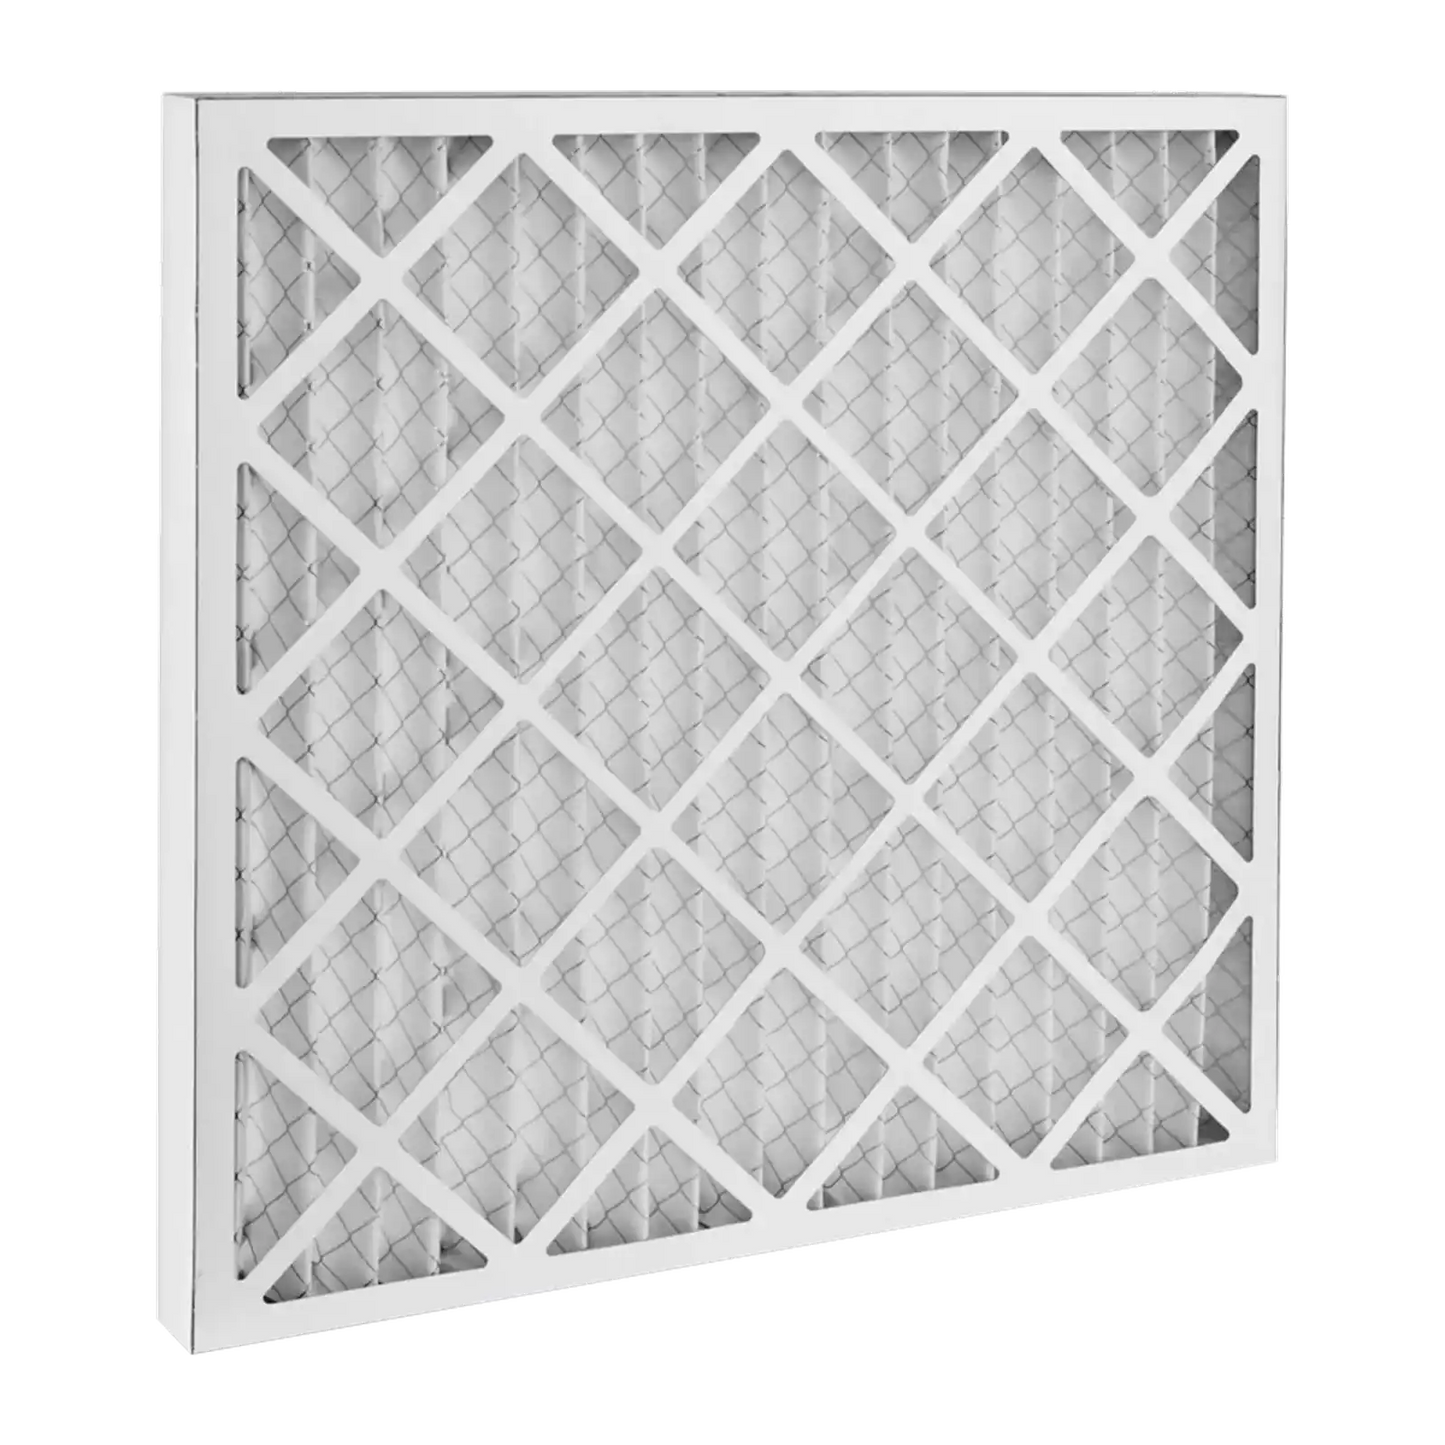 Dafco 16x24x1 Furnace AC Filter - Case of 12